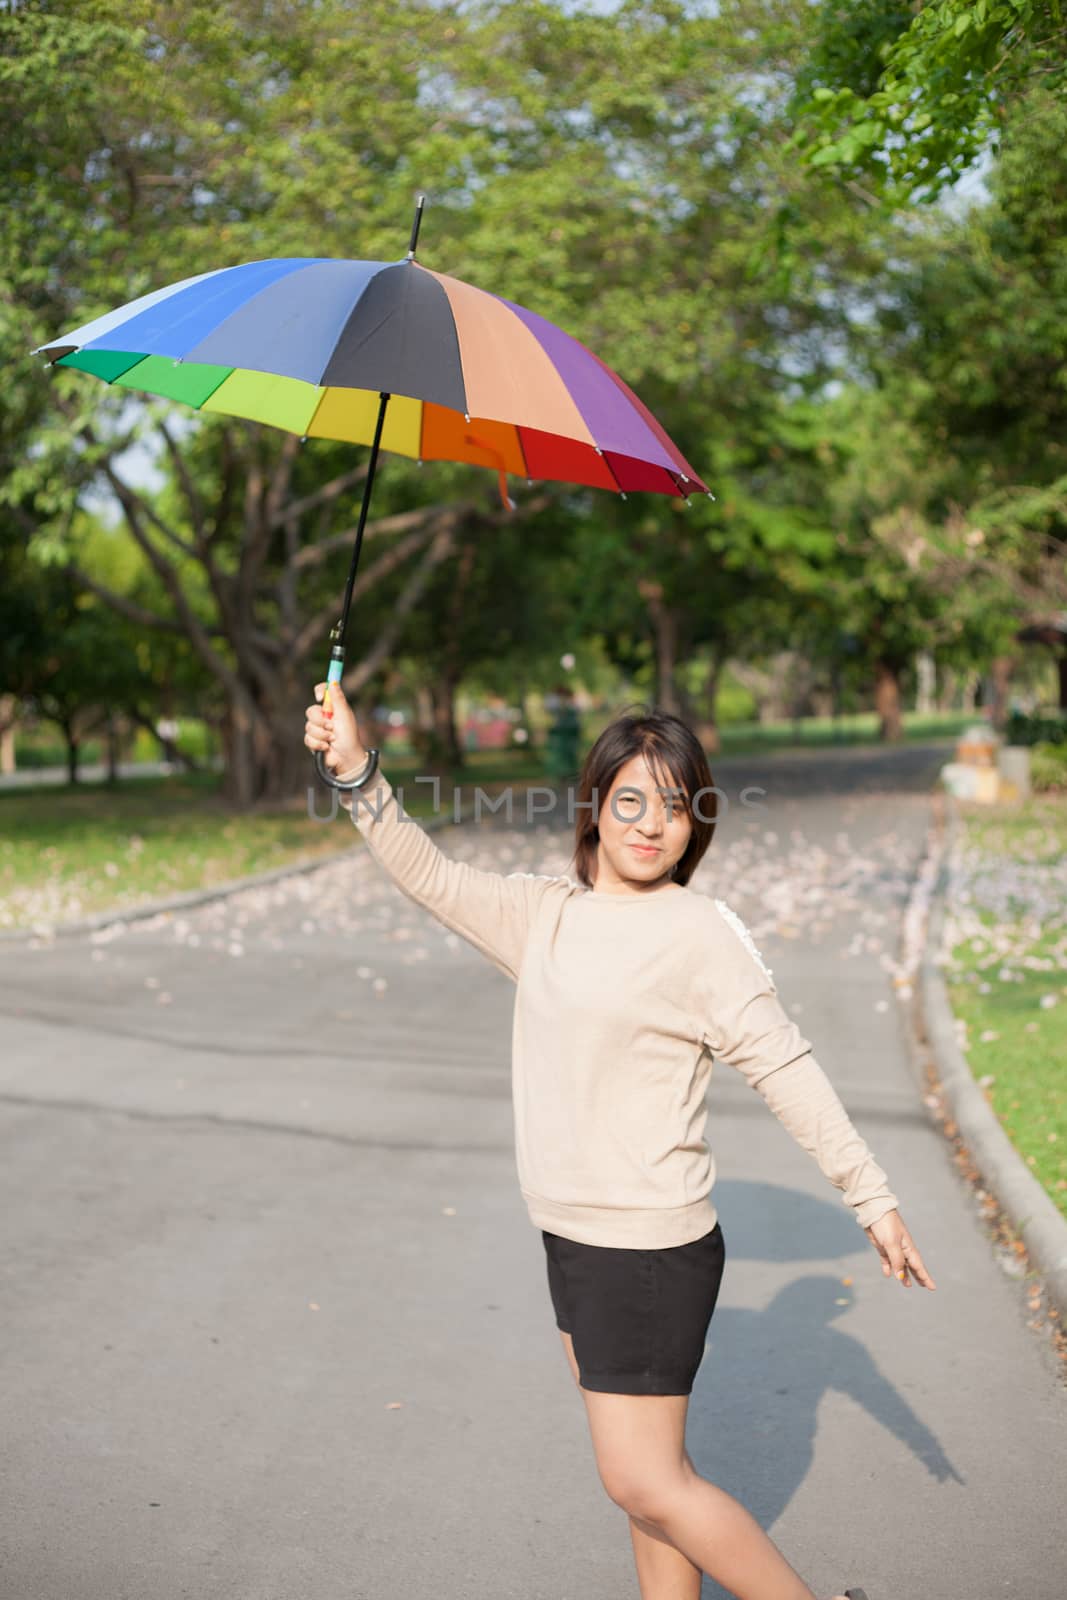 Women holding umbrella by a454